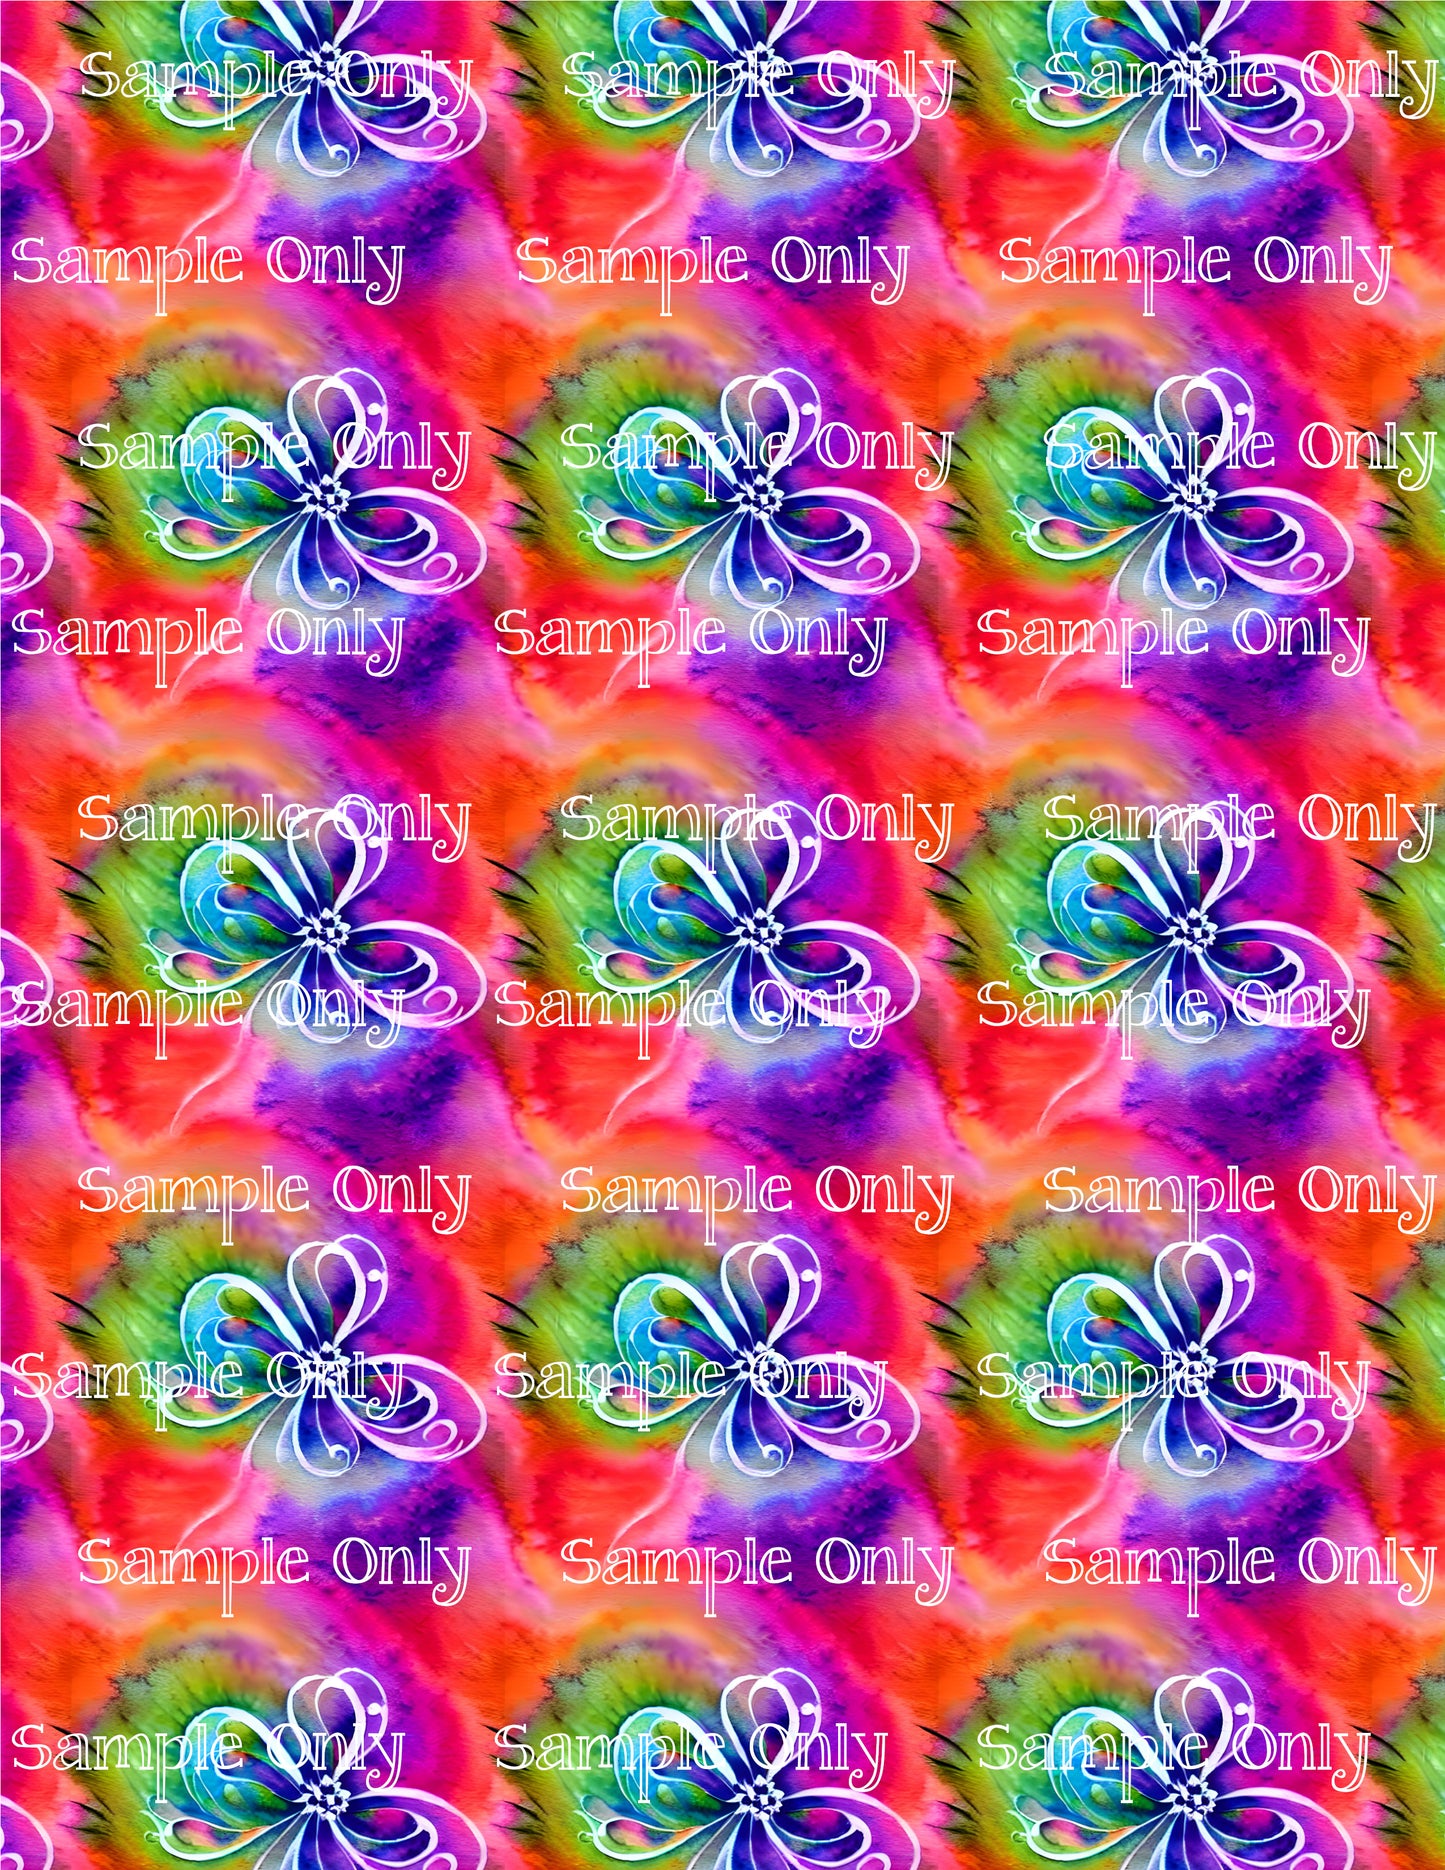 Fantasy Psychedelic Swirl Image Sheet For Polymer Clay Transfer Decal DIGITAL FILE OR PRINTED PS11